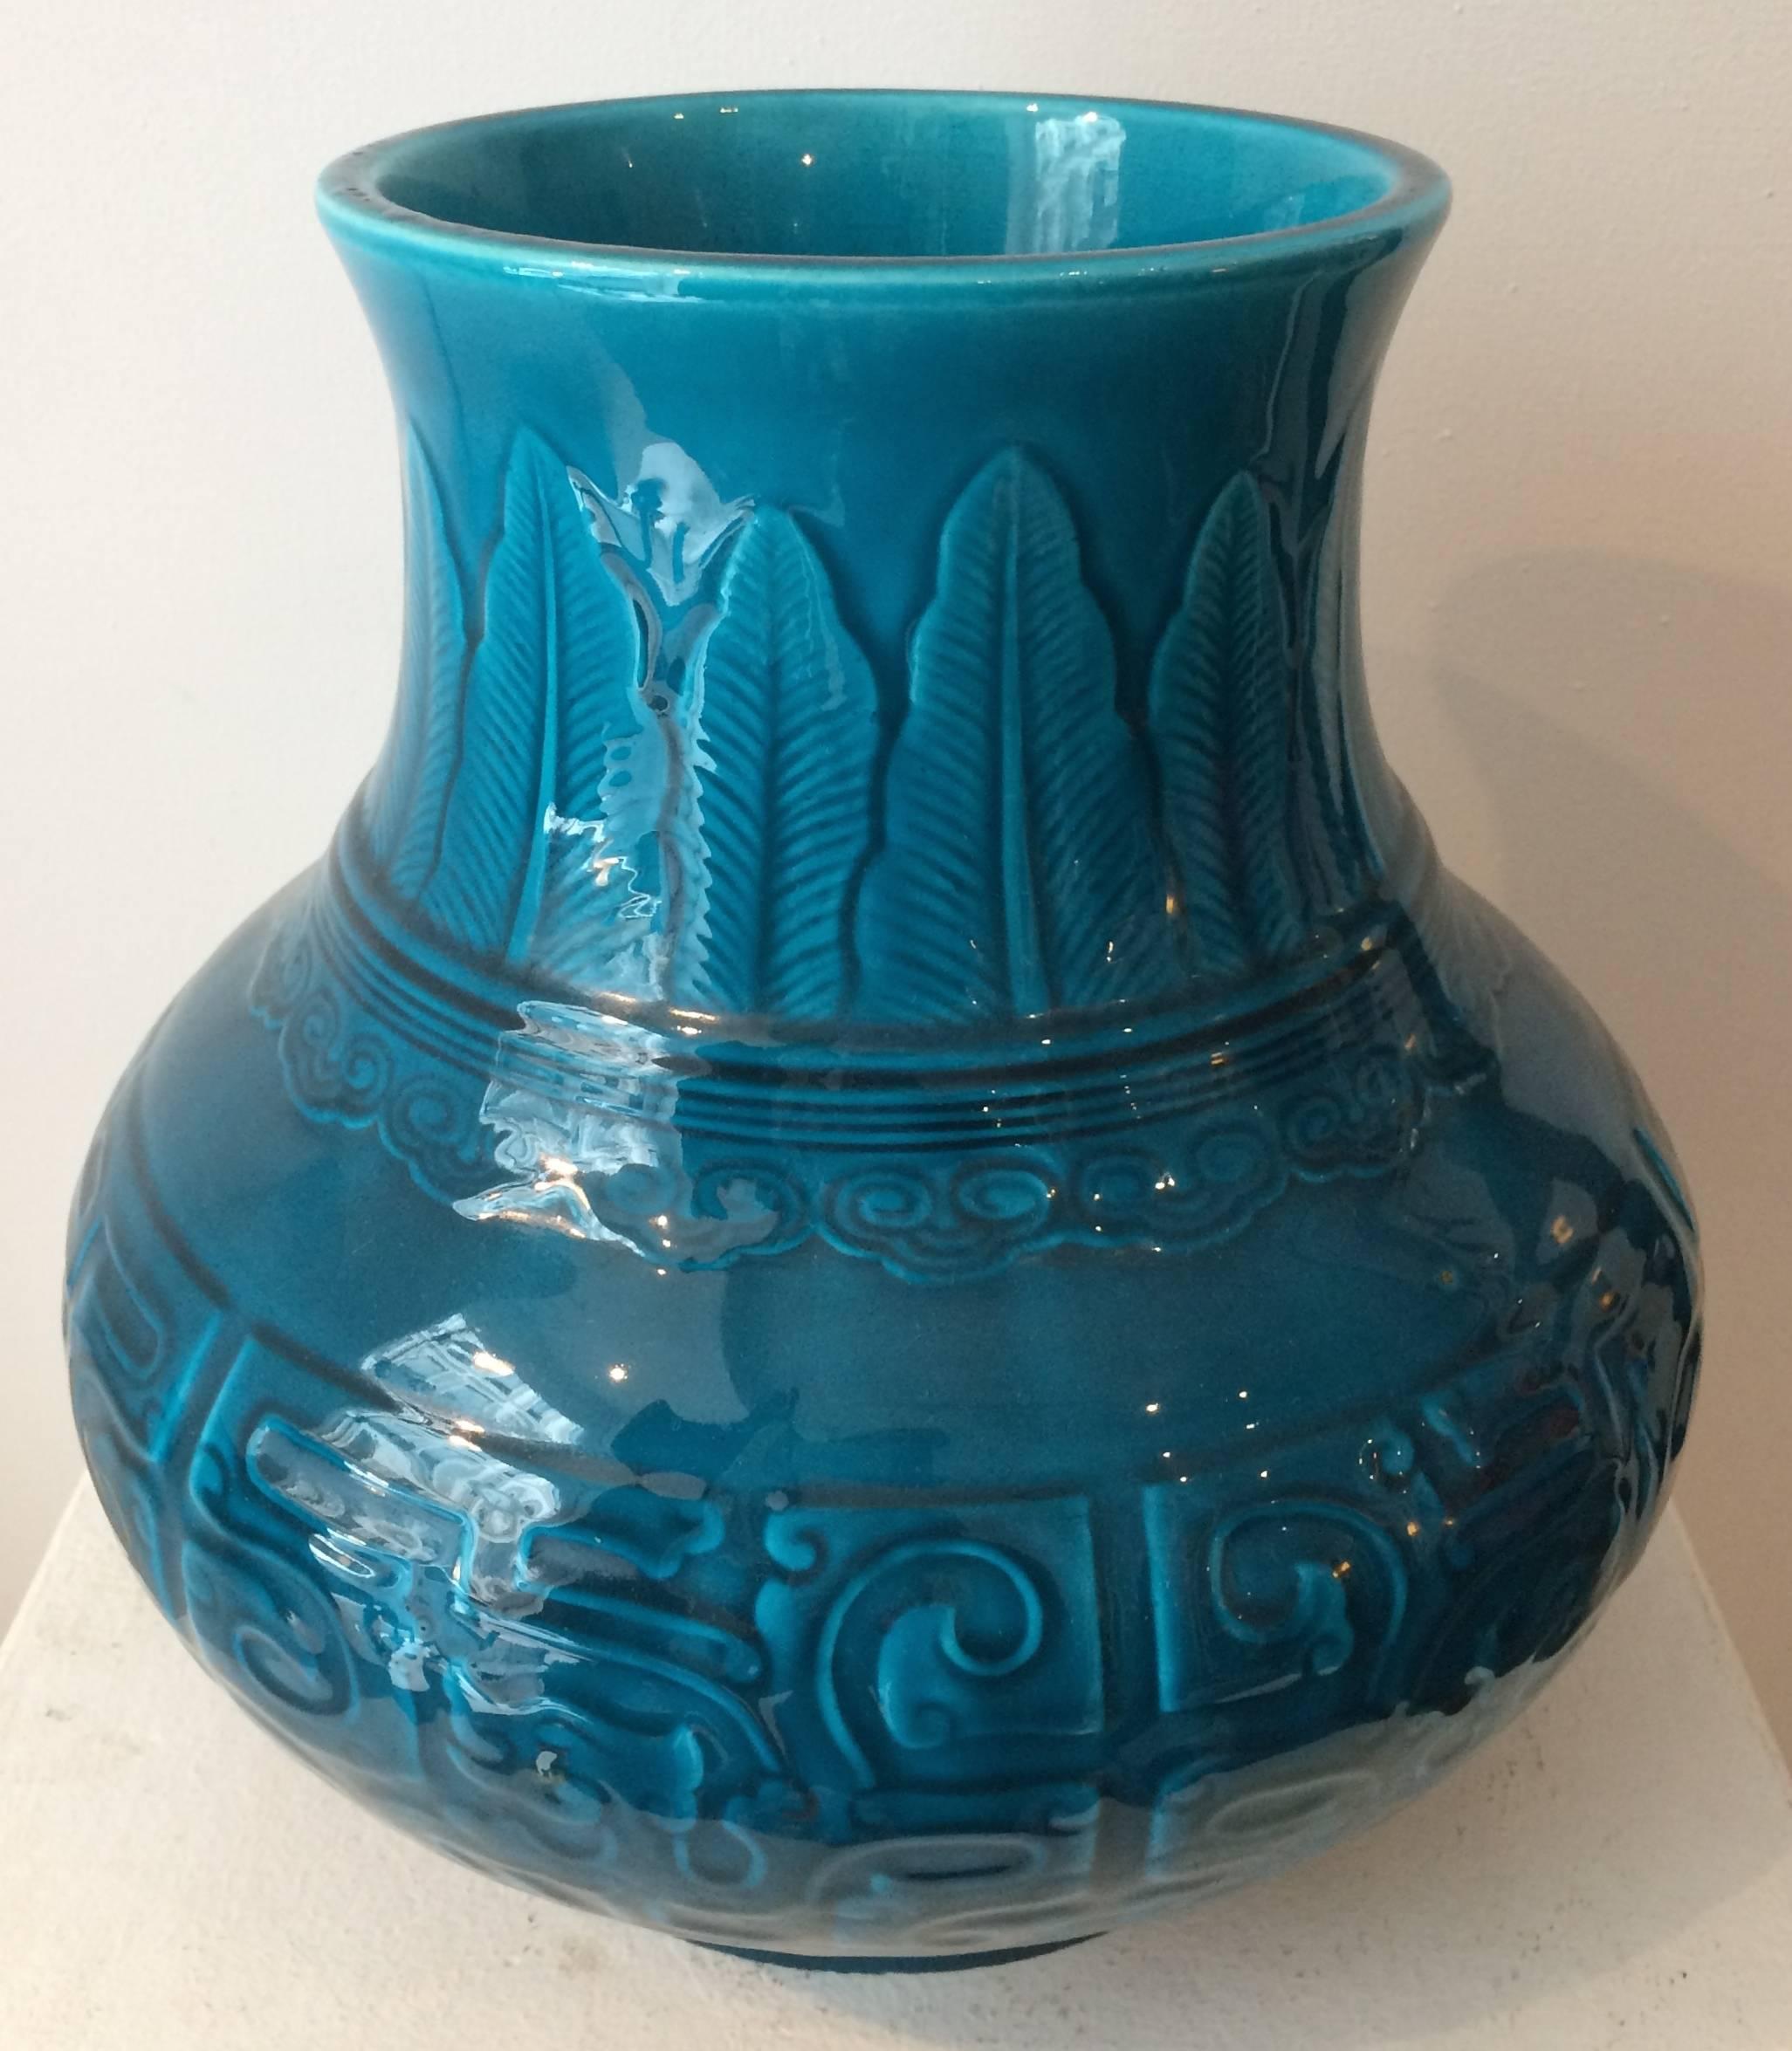 A Theodore deck Faience Persian blue ground vase molded in the Chinese Archaistic taste, the body with scrolls, the neck with plantain leaves and cloud collar bands.
Impressed TH.DECK mark.